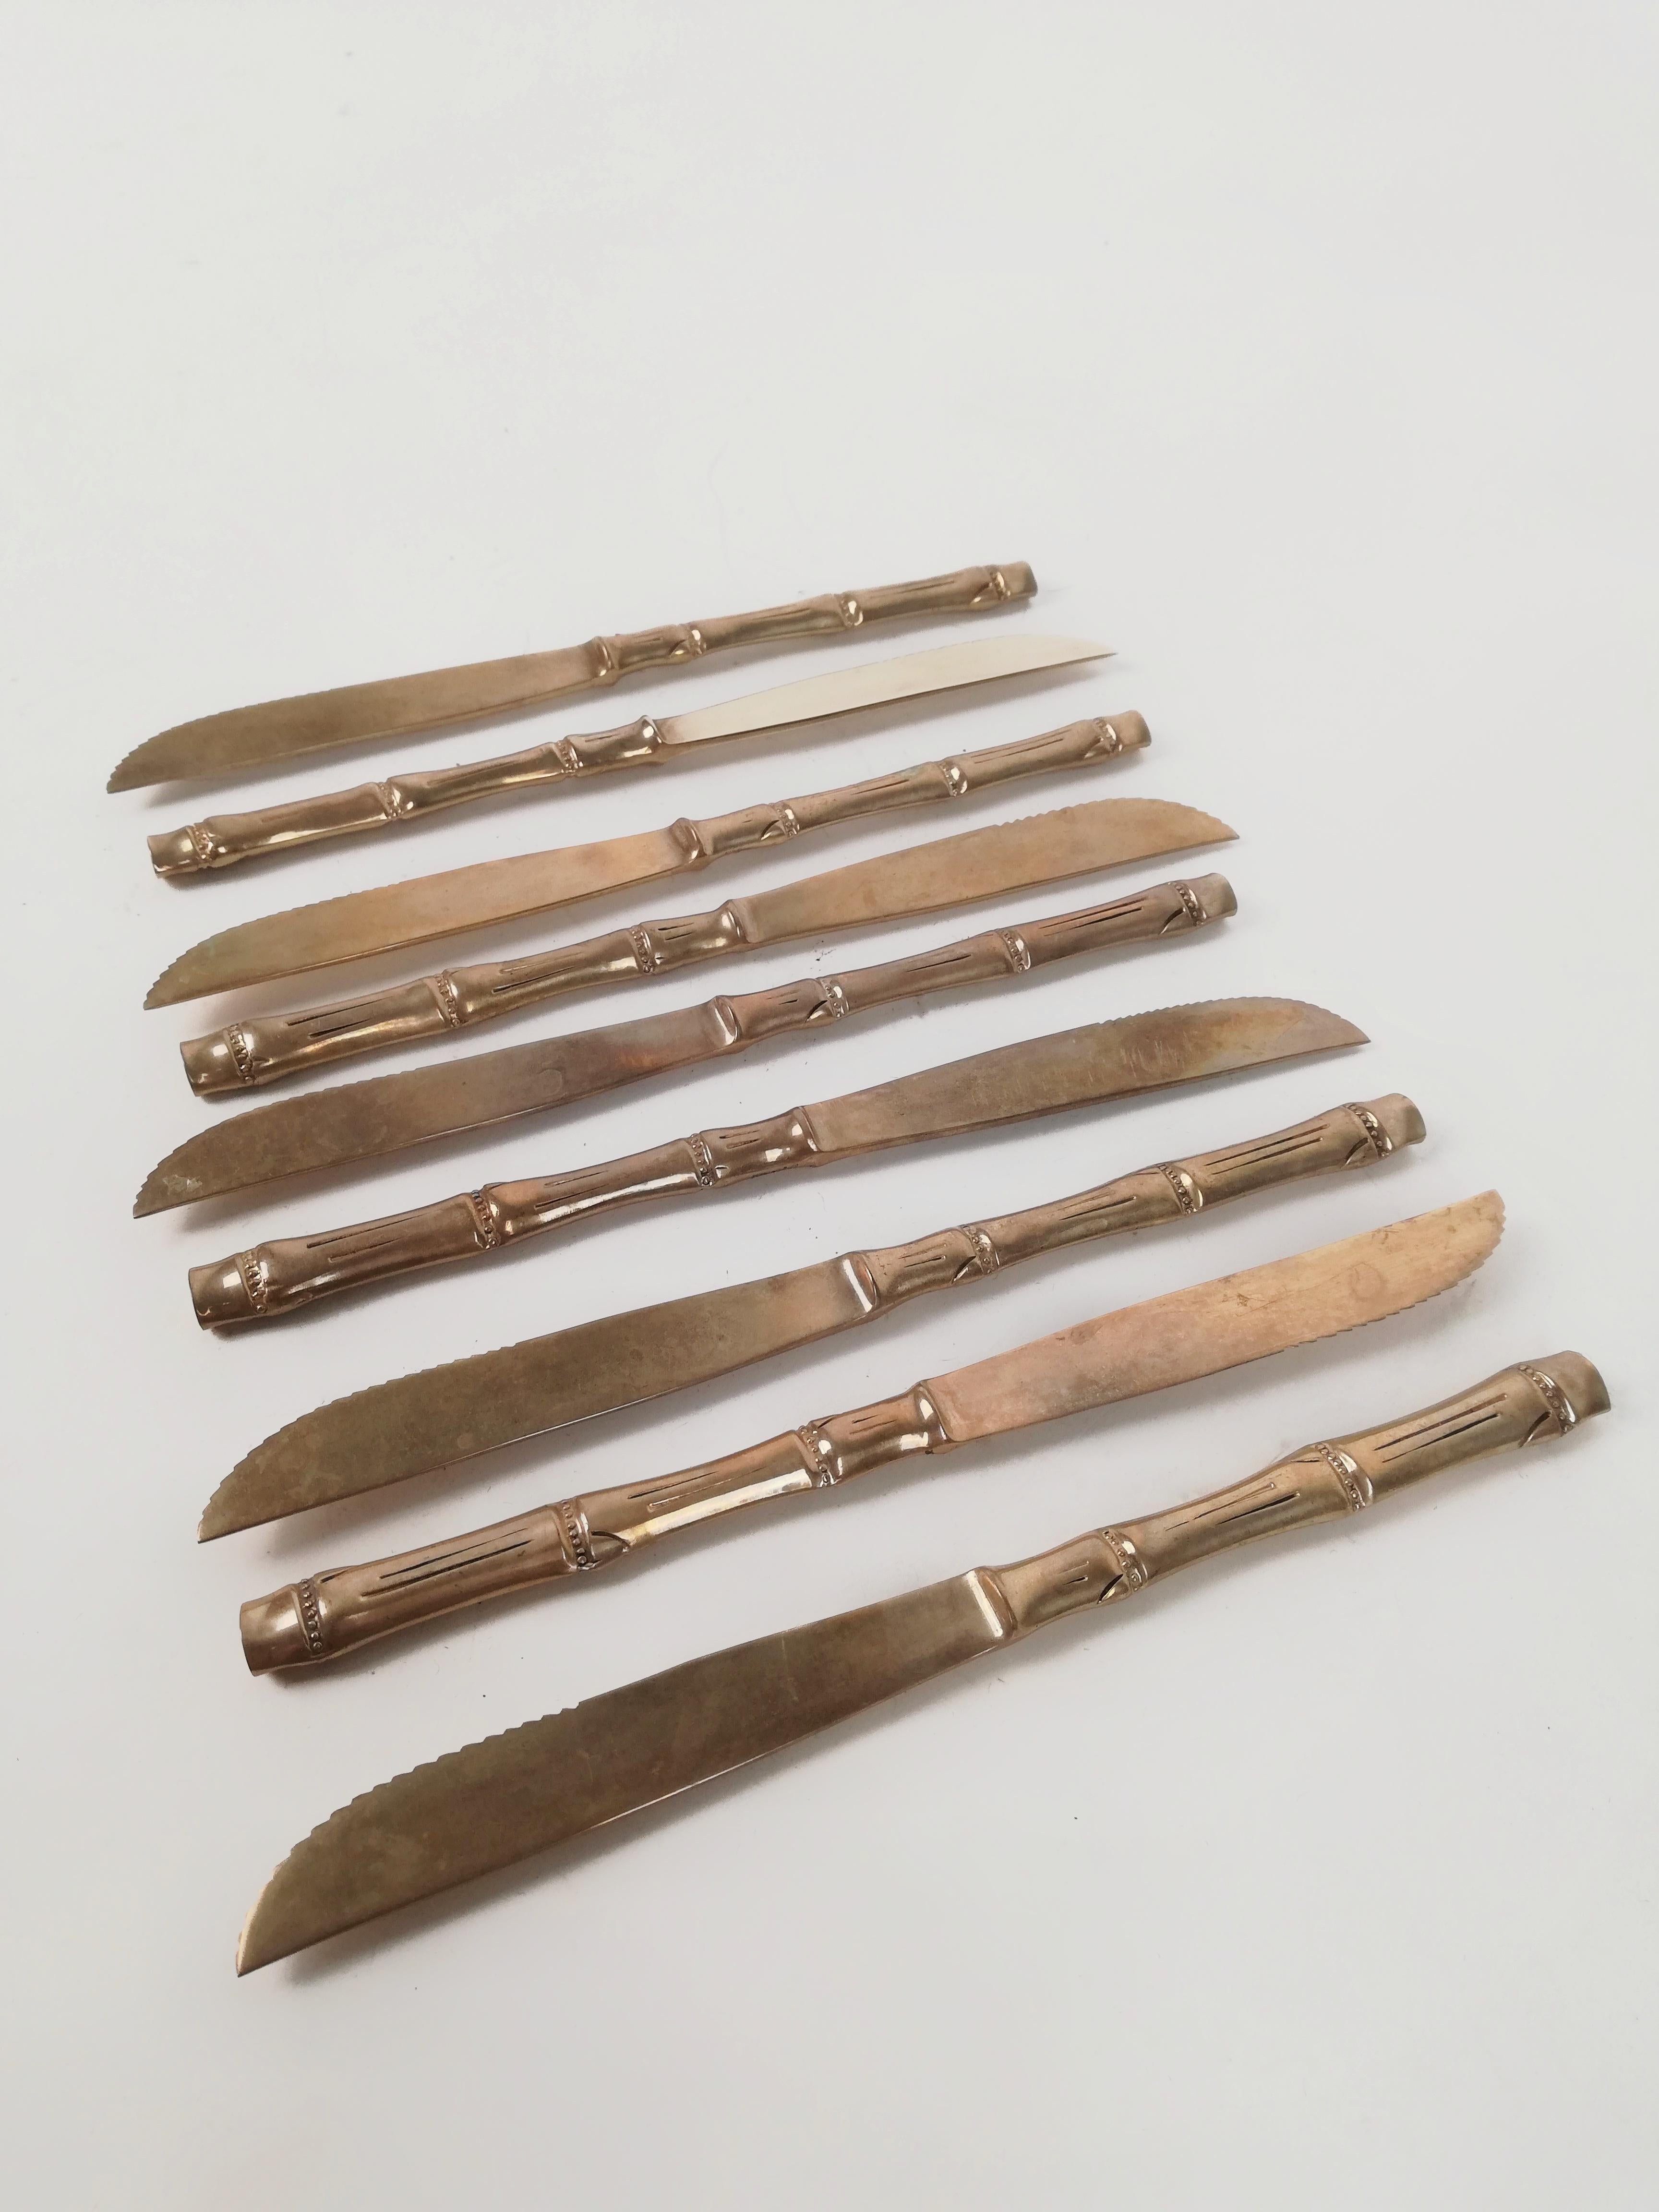 Vintage Cutlery Set in Hollywood Regency Style made in Brass Faux Bamboo, 1970s For Sale 4